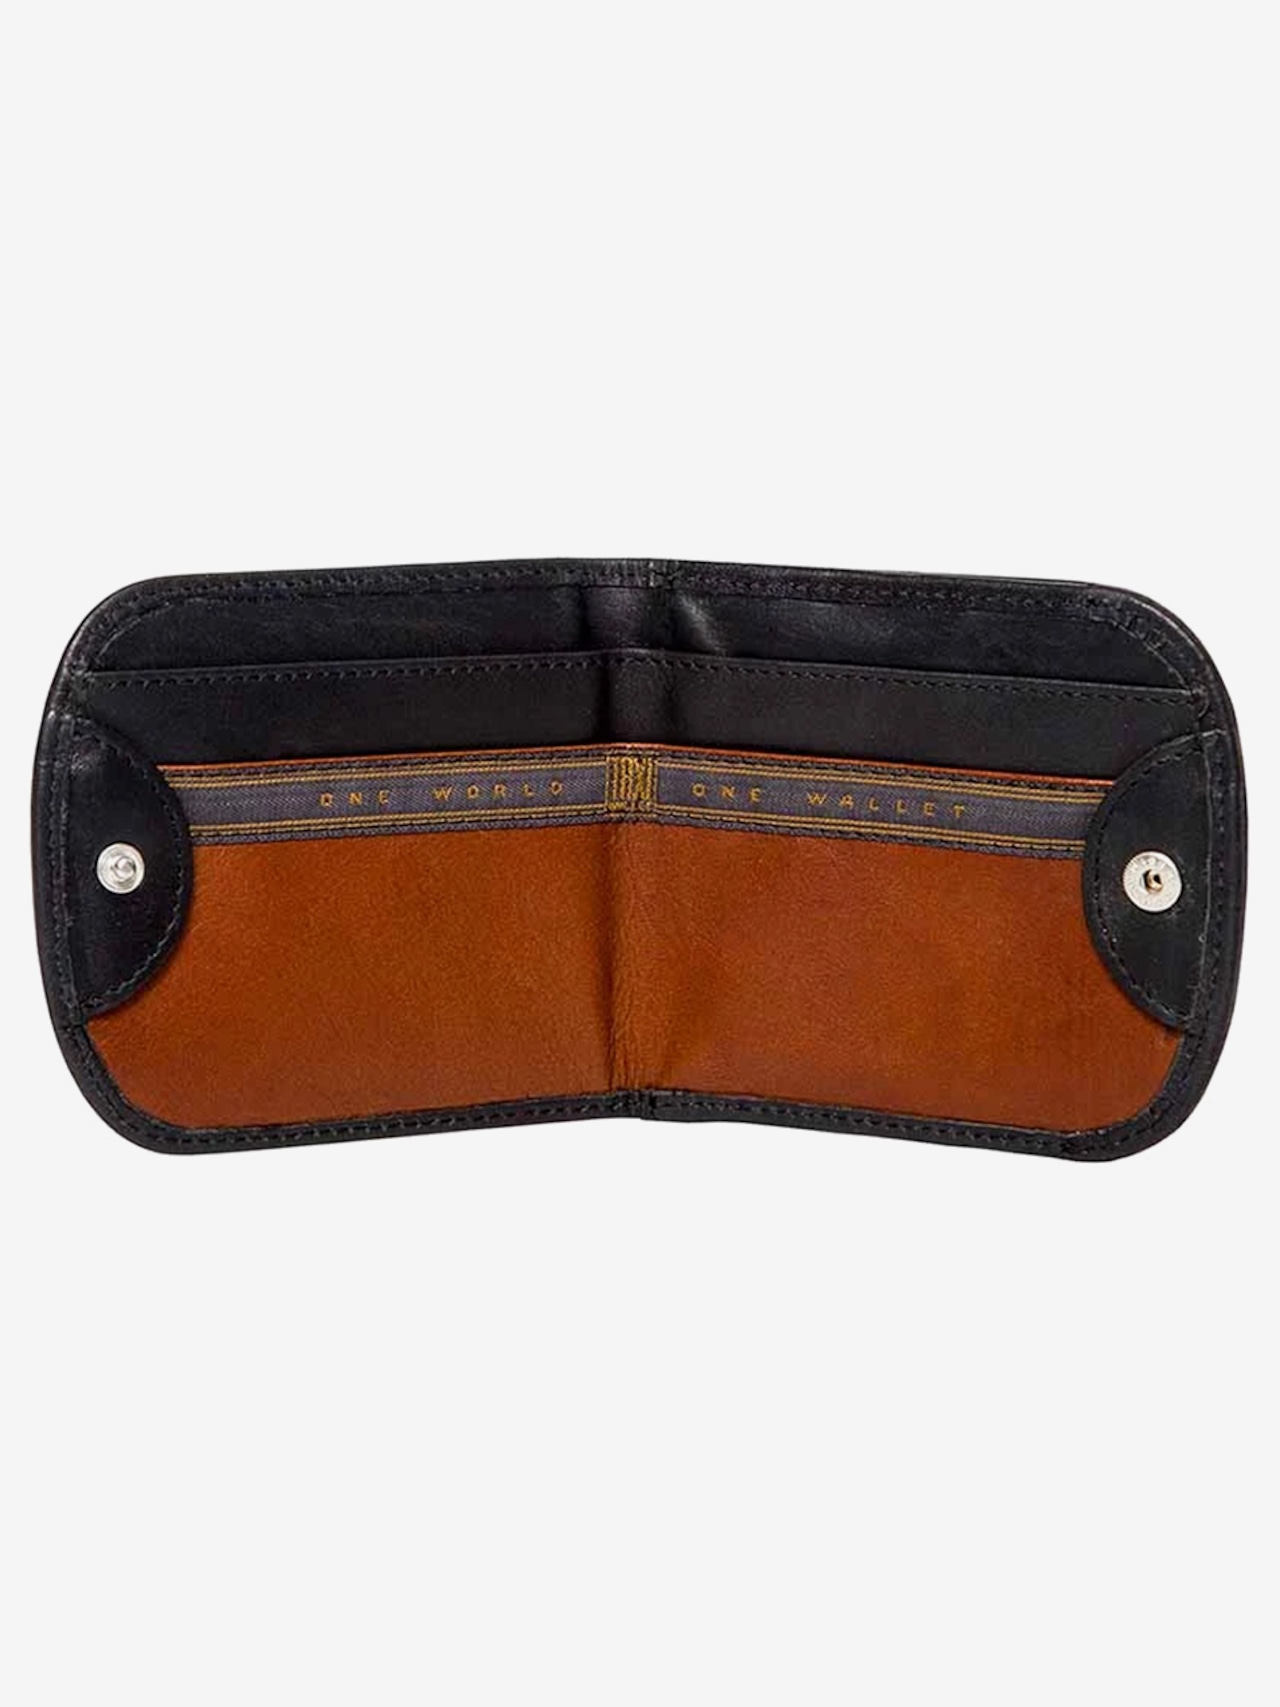 TAXI WALLET「The Saddle Black Brown（コンパクト 財布）」